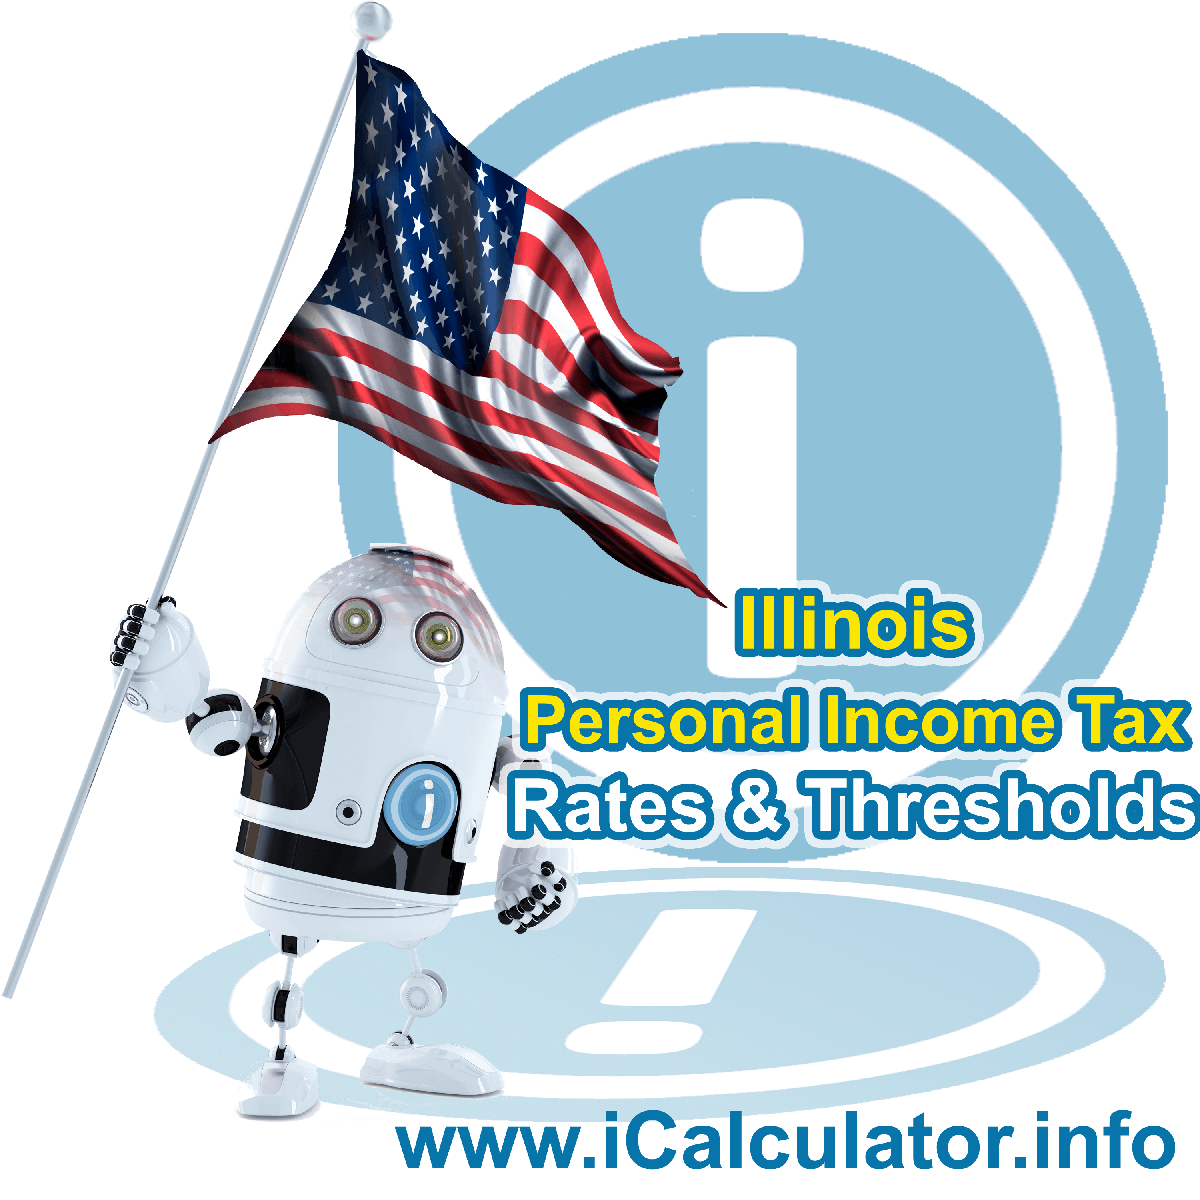 Illinois State Tax Tables 2021. This image displays details of the Illinois State Tax Tables for the 2021 tax return year which is provided in support of the 2021 US Tax Calculator